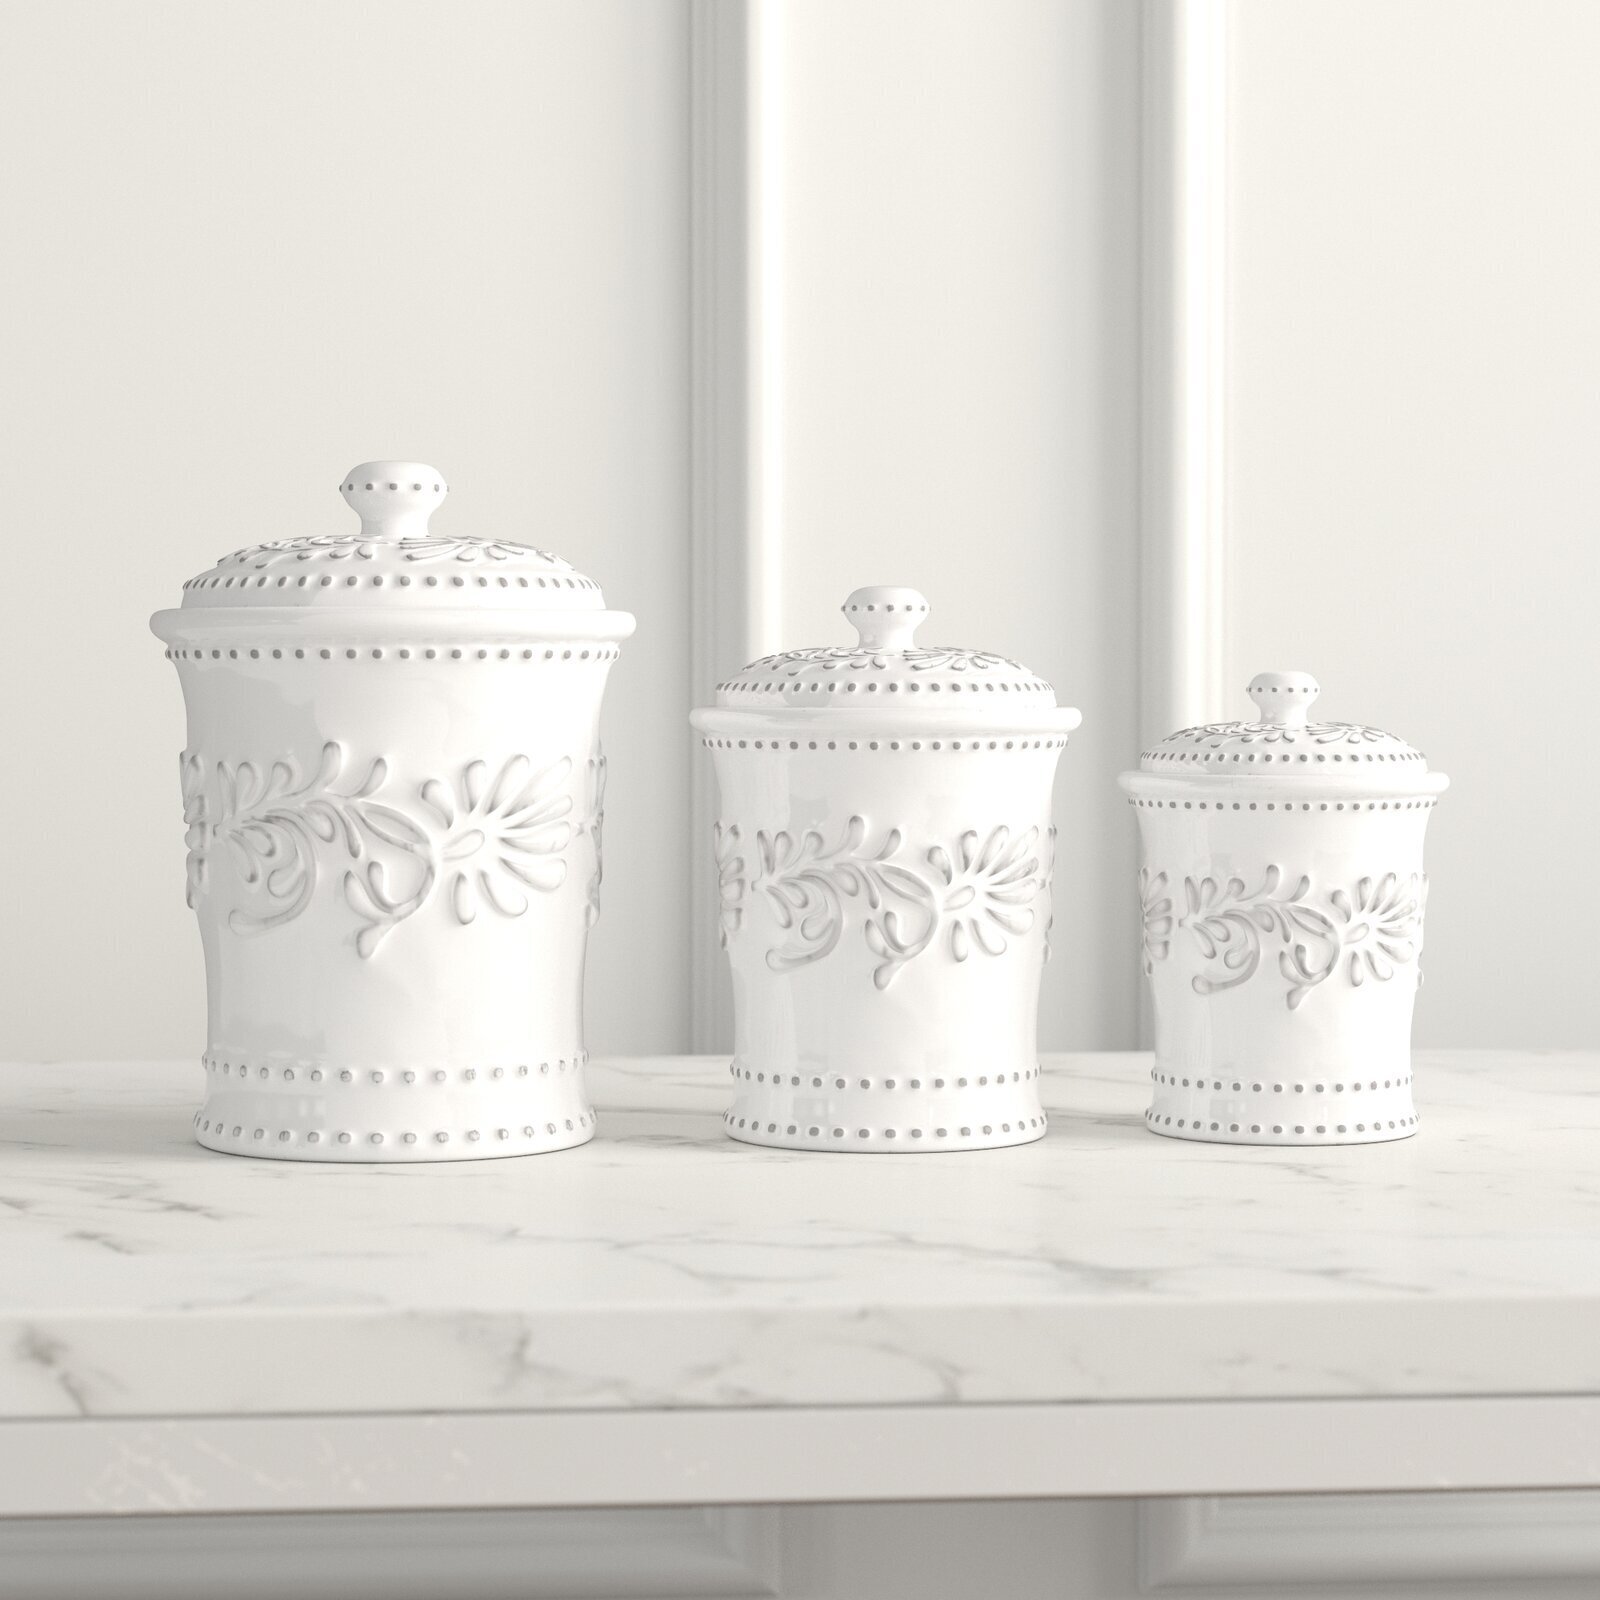 Beautiful Decorative Kitchen Canisters   